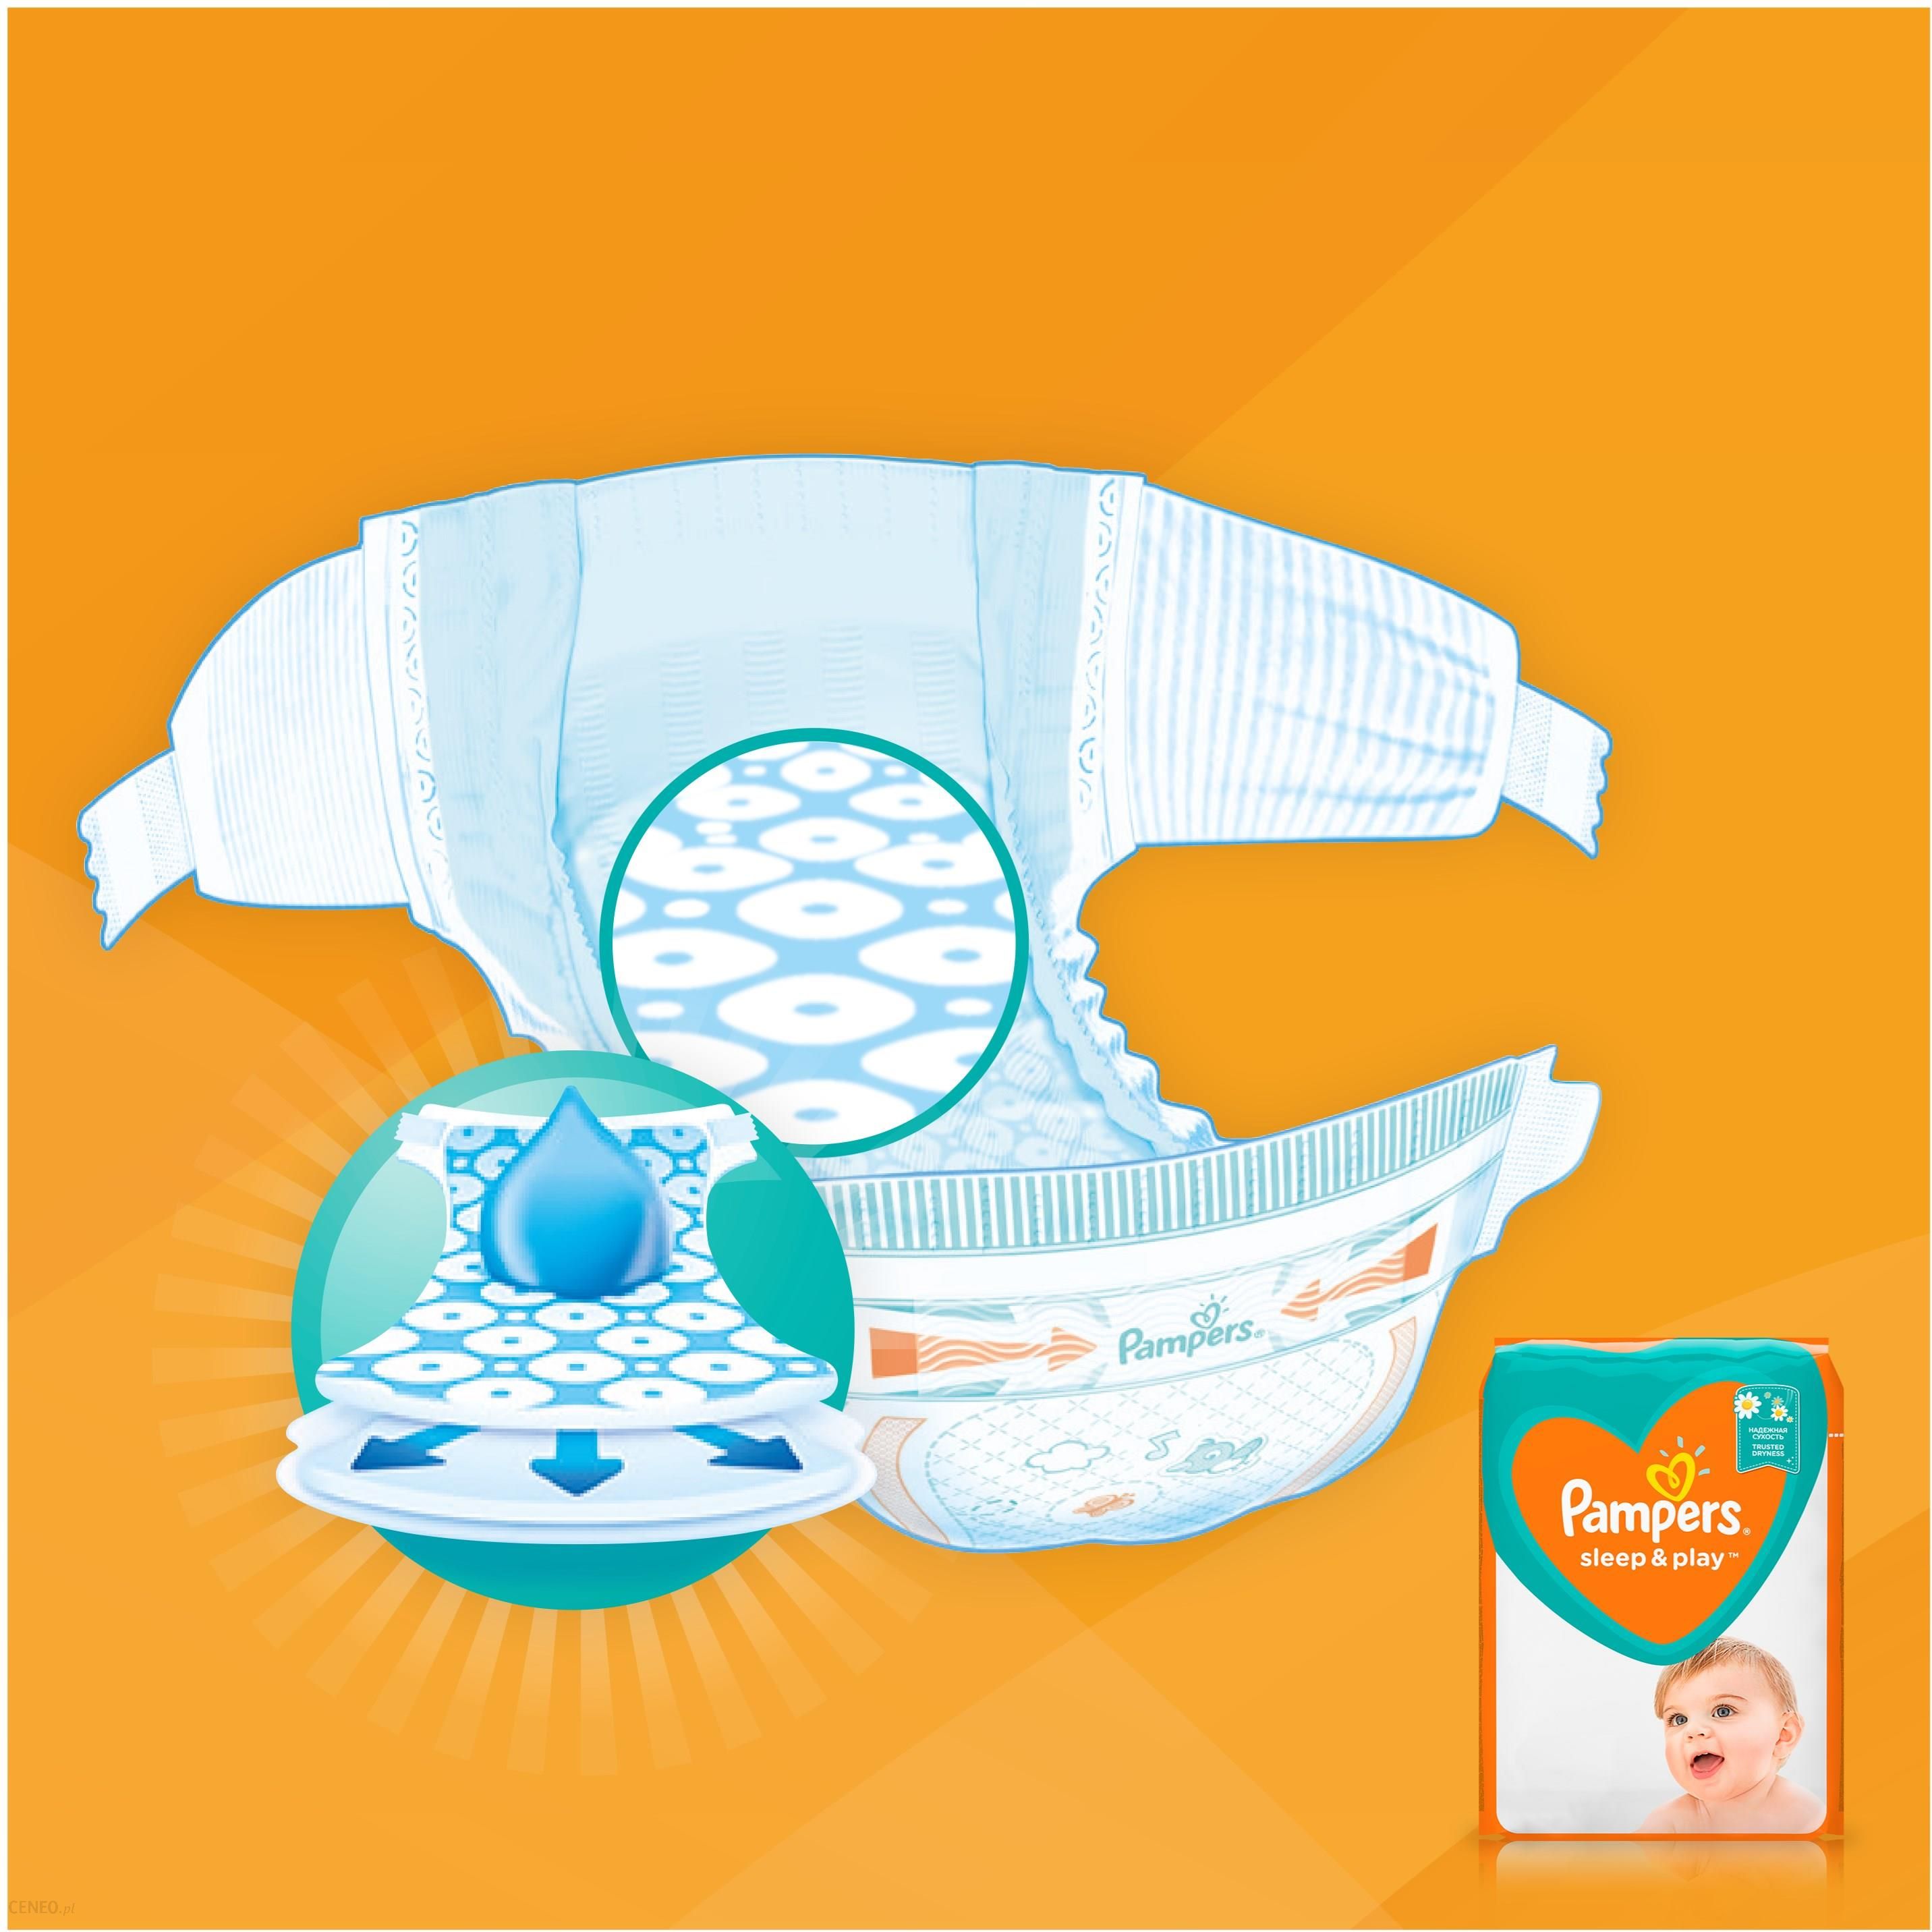 pampers baby active dry 4